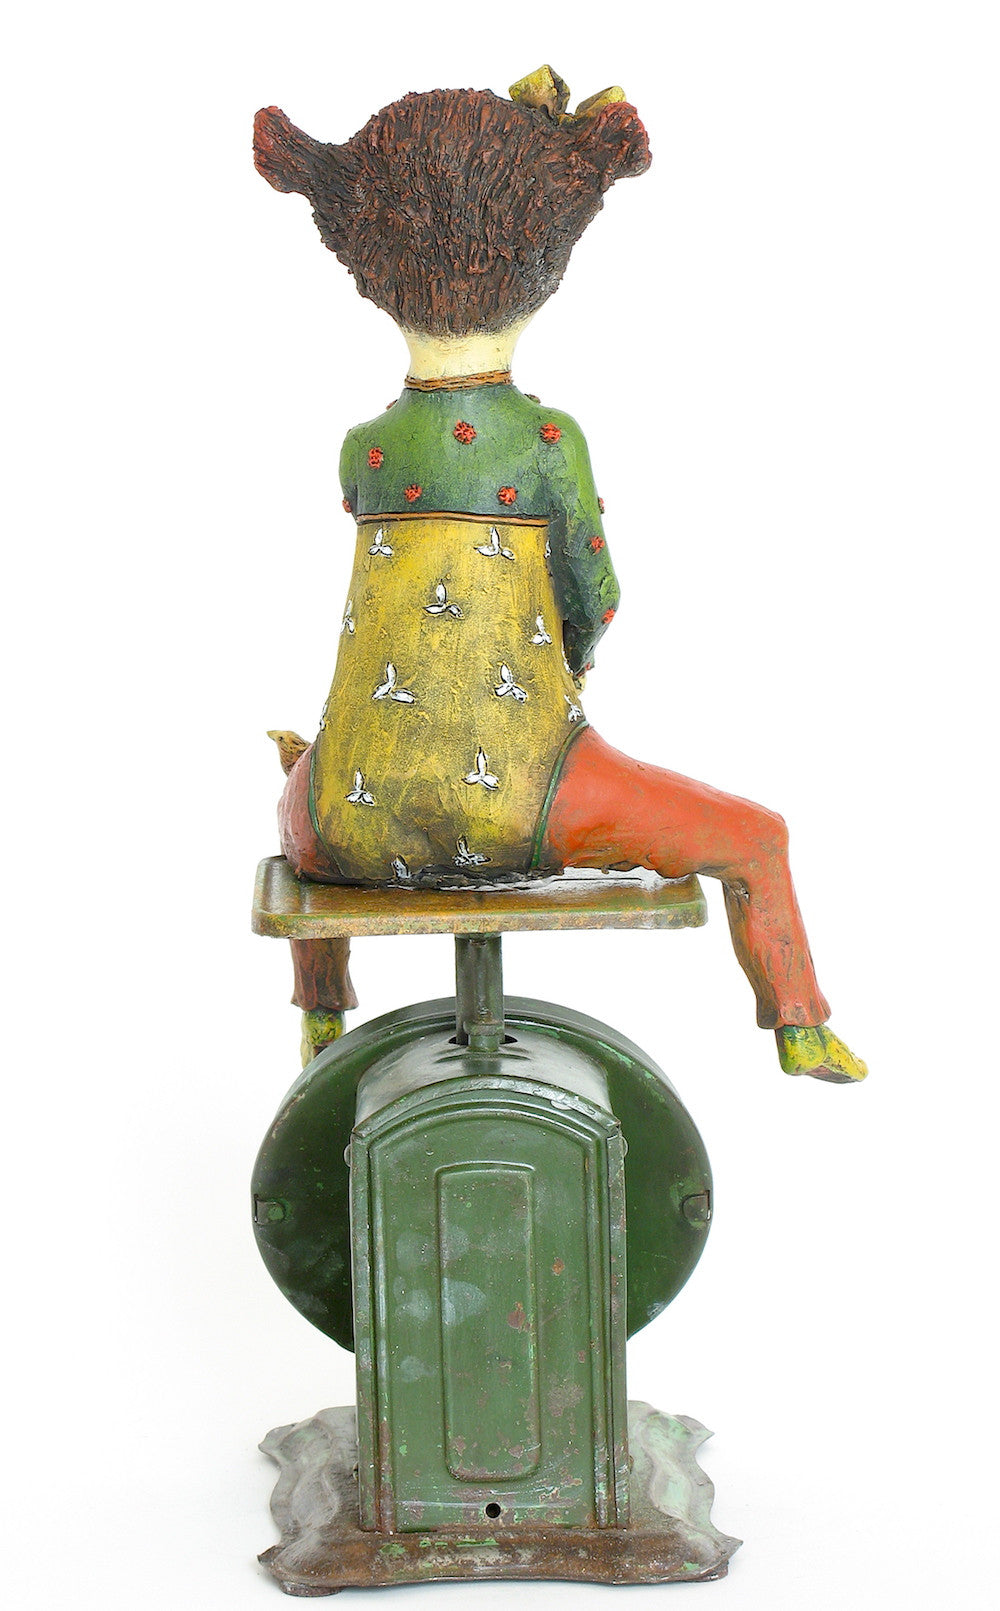 SOLD  "Weighing Her Options" original ceramic sculpture with antique scale" by Jacquline Hurlbert